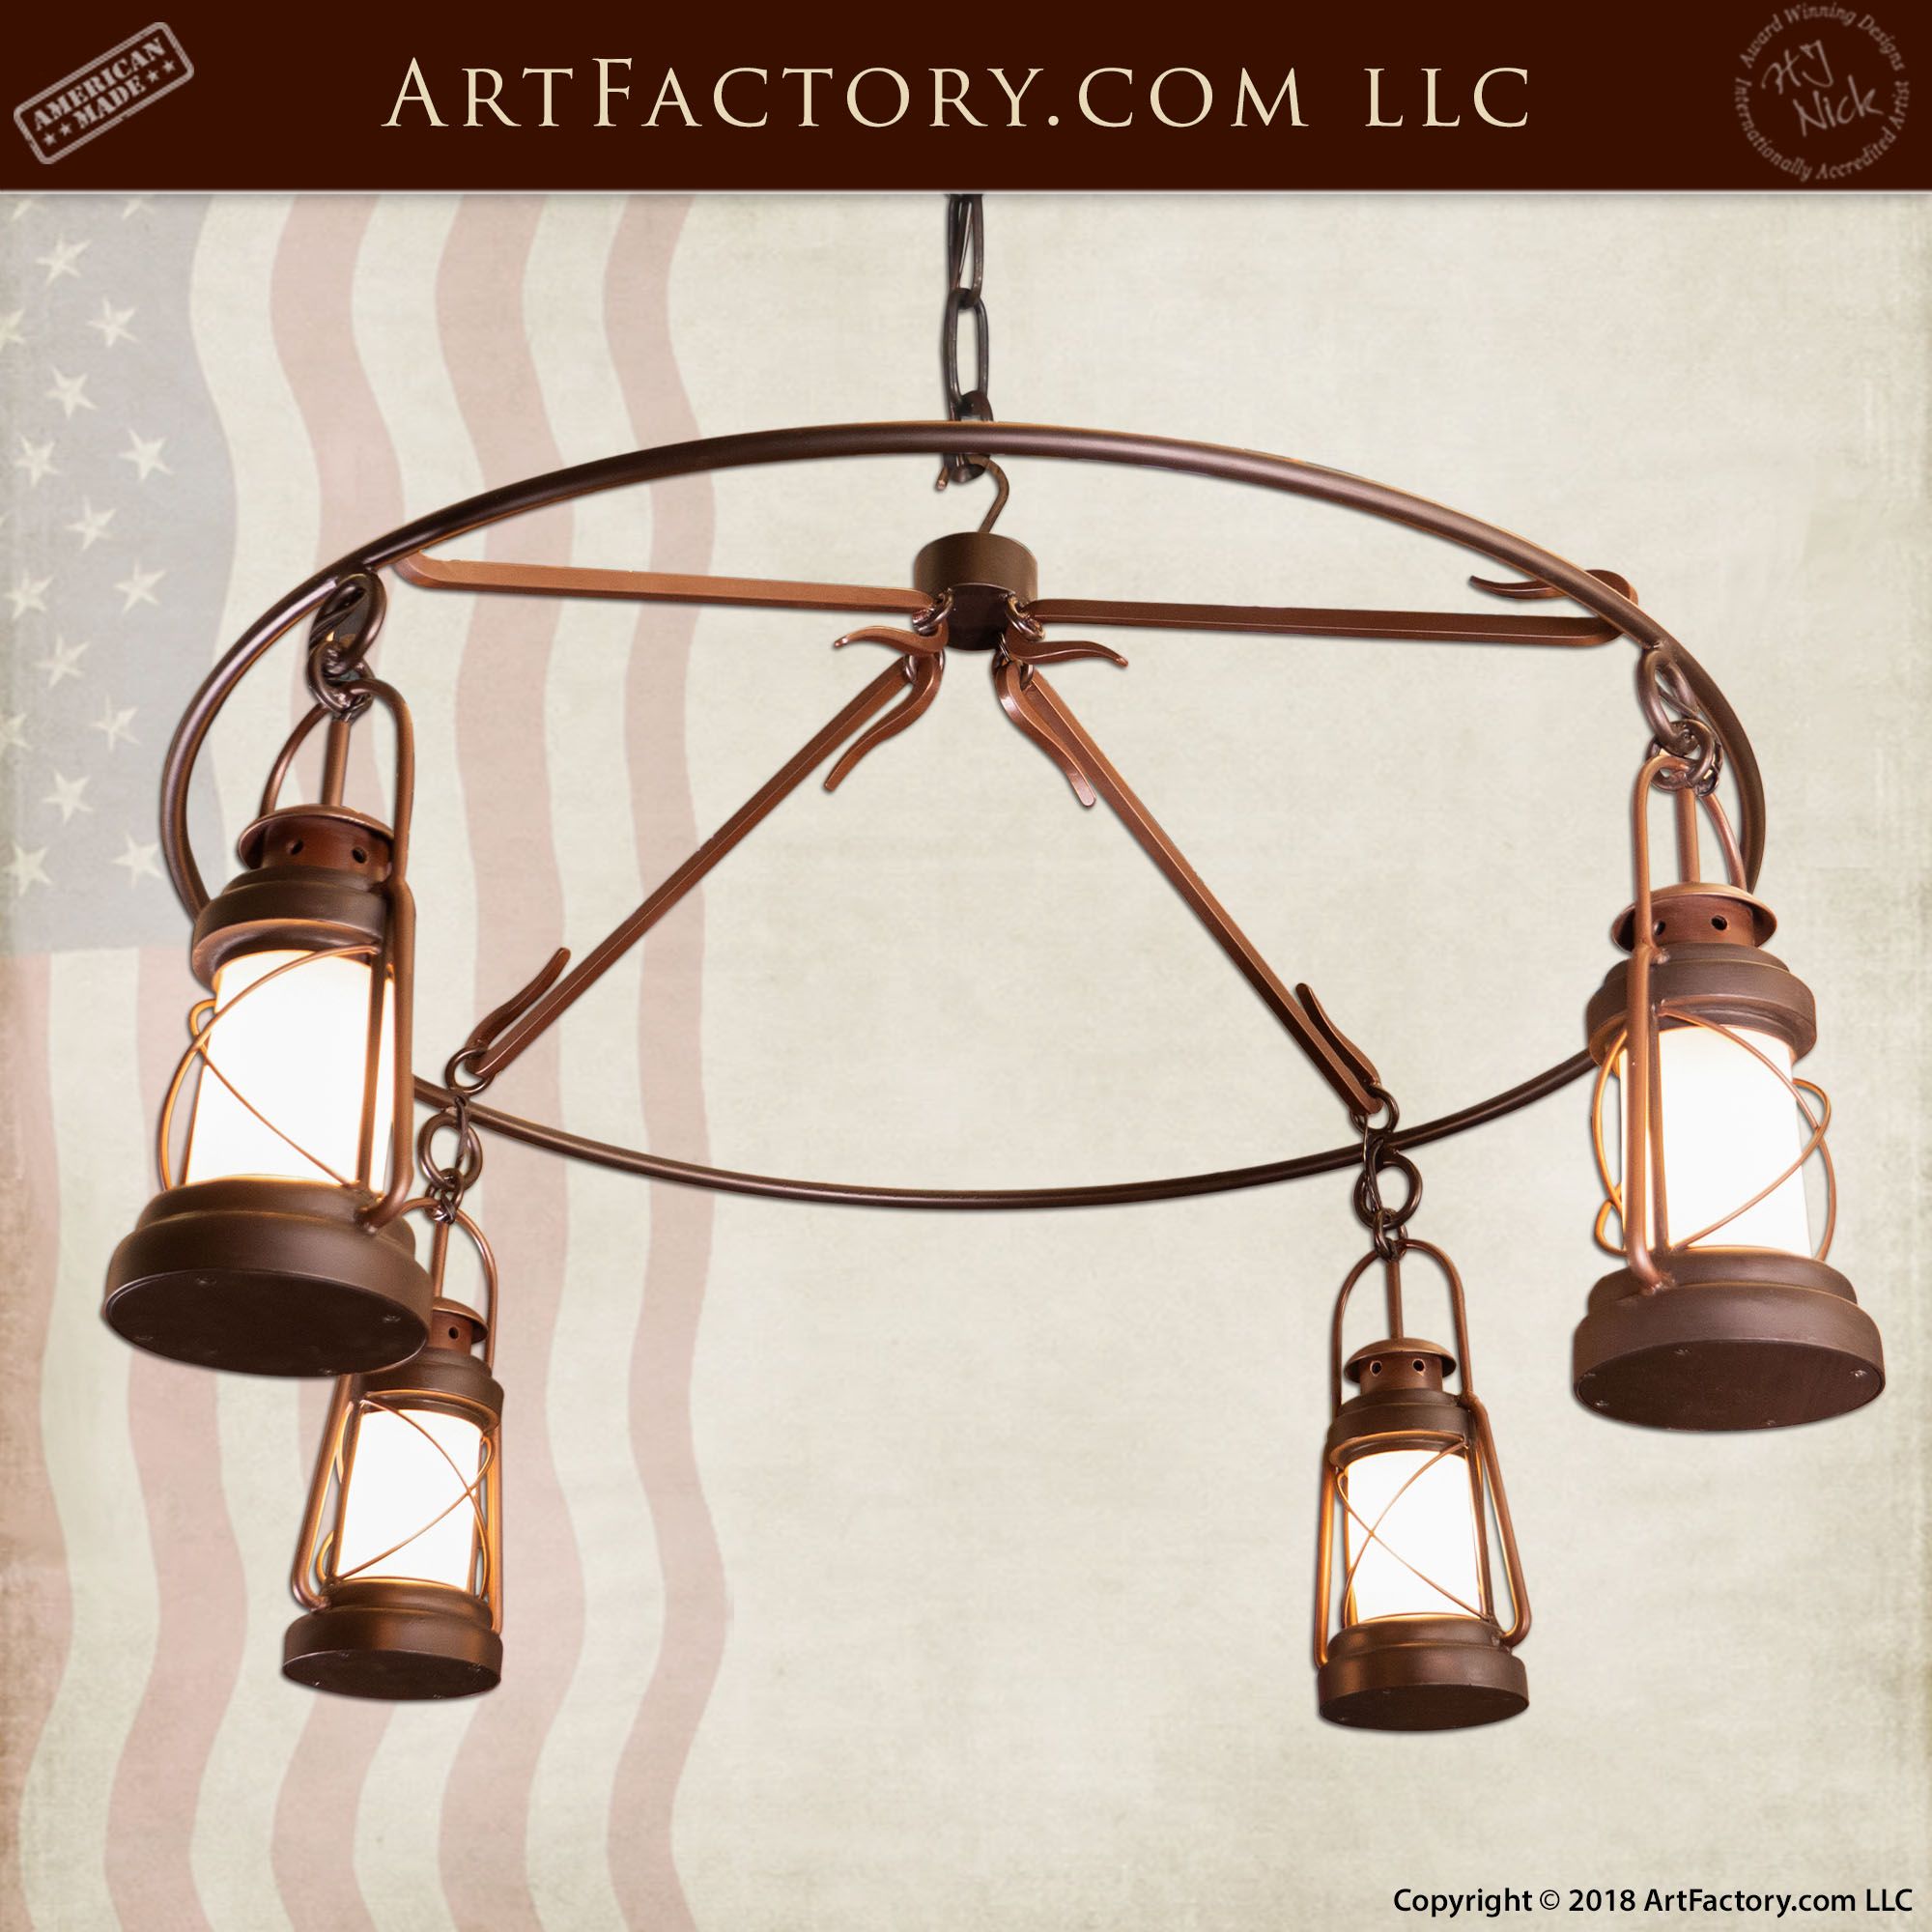 Wrought Iron Lantern Chandelier: Hand Forgedmaster Blacksmiths Intended For Forged Iron Lantern Chandeliers (Photo 10 of 15)